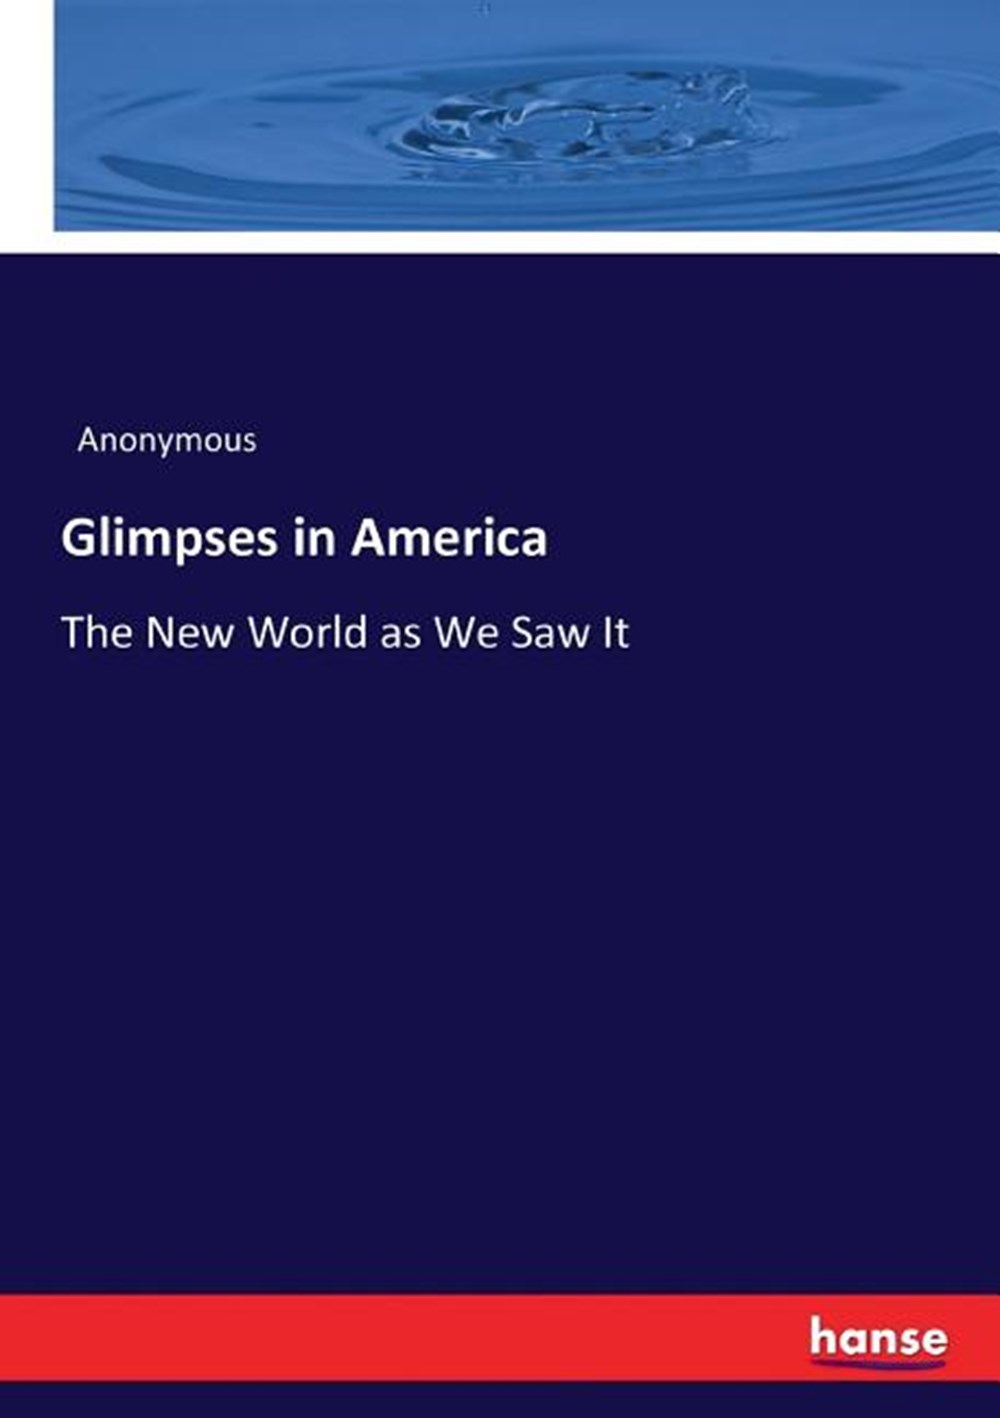 Glimpses in America: The New World as We Saw It